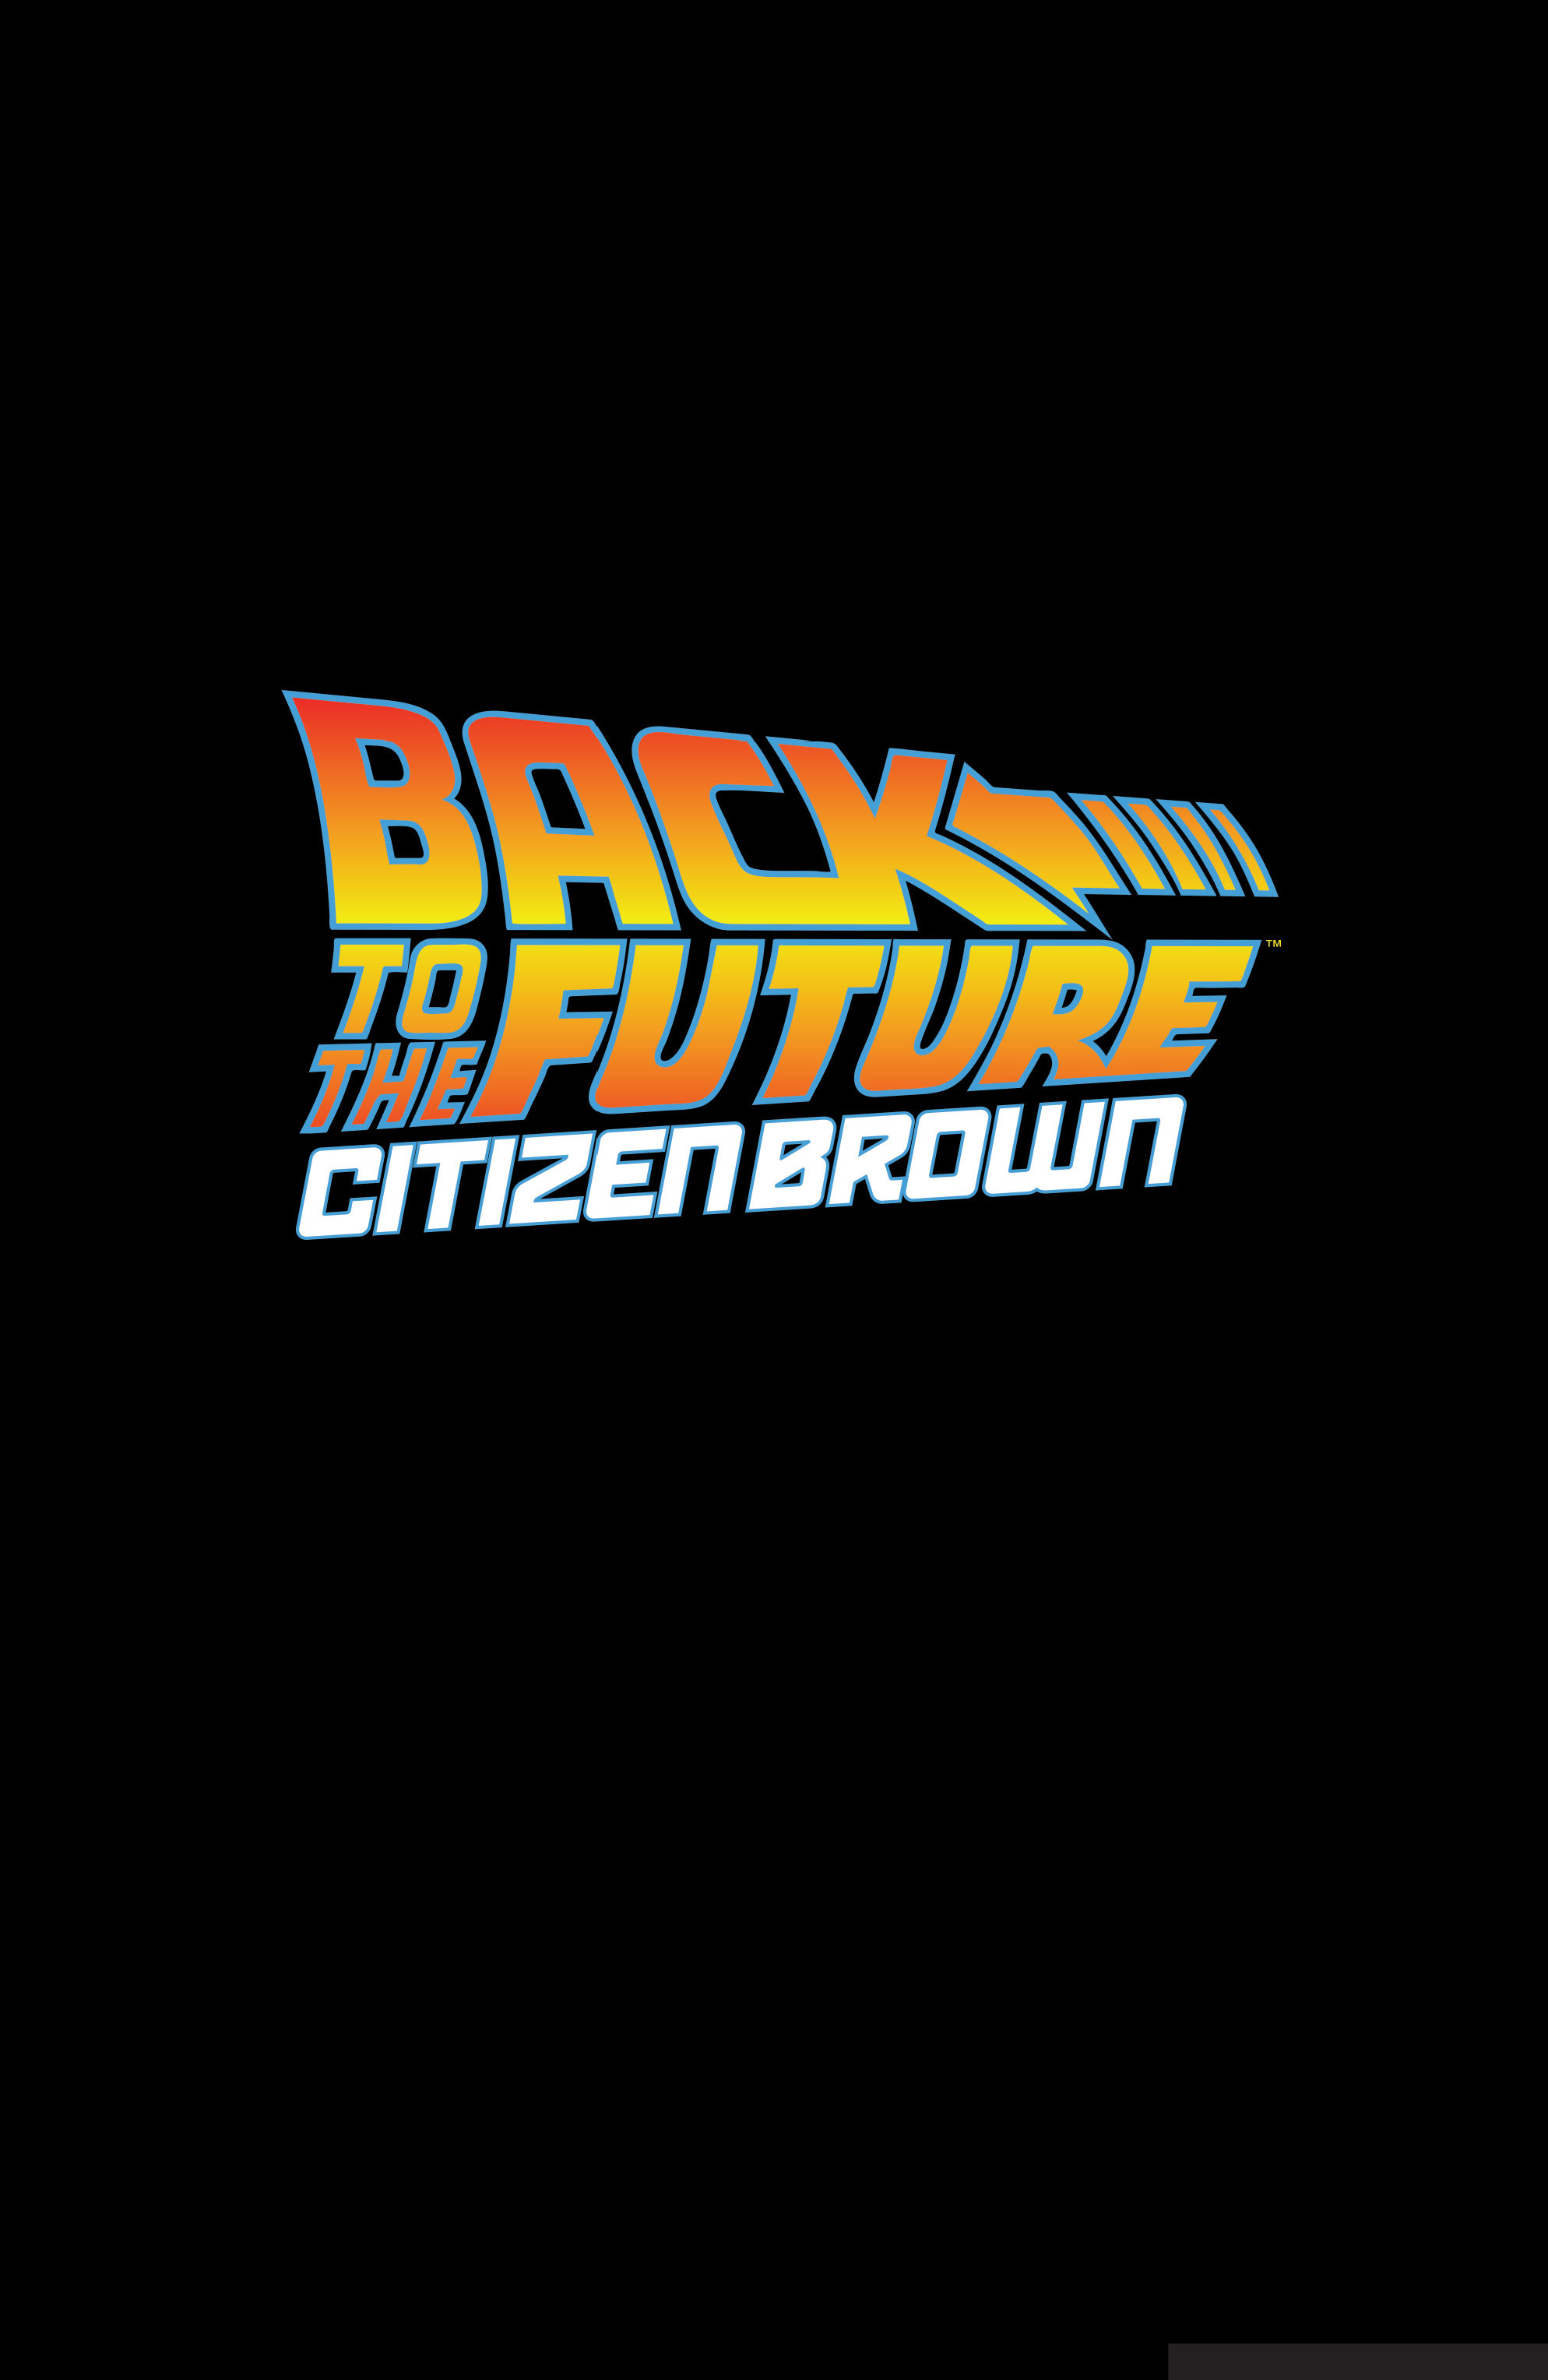 Read online Back to the Future: Citizen Brown comic -  Issue #2 - 37